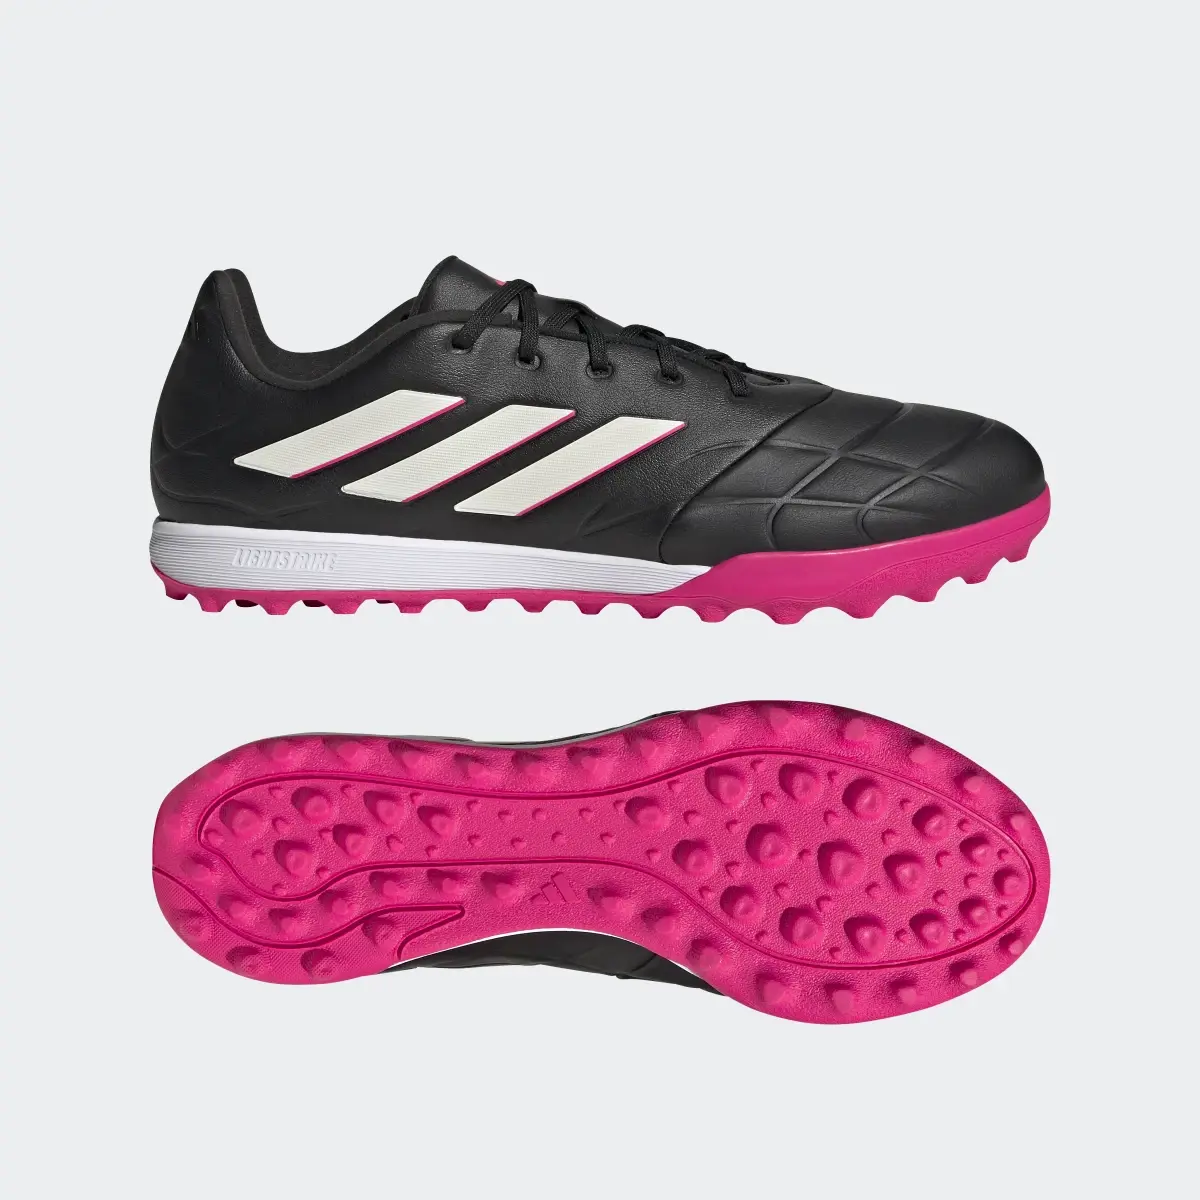 Adidas Copa Pure.3 Turf Boots. 1